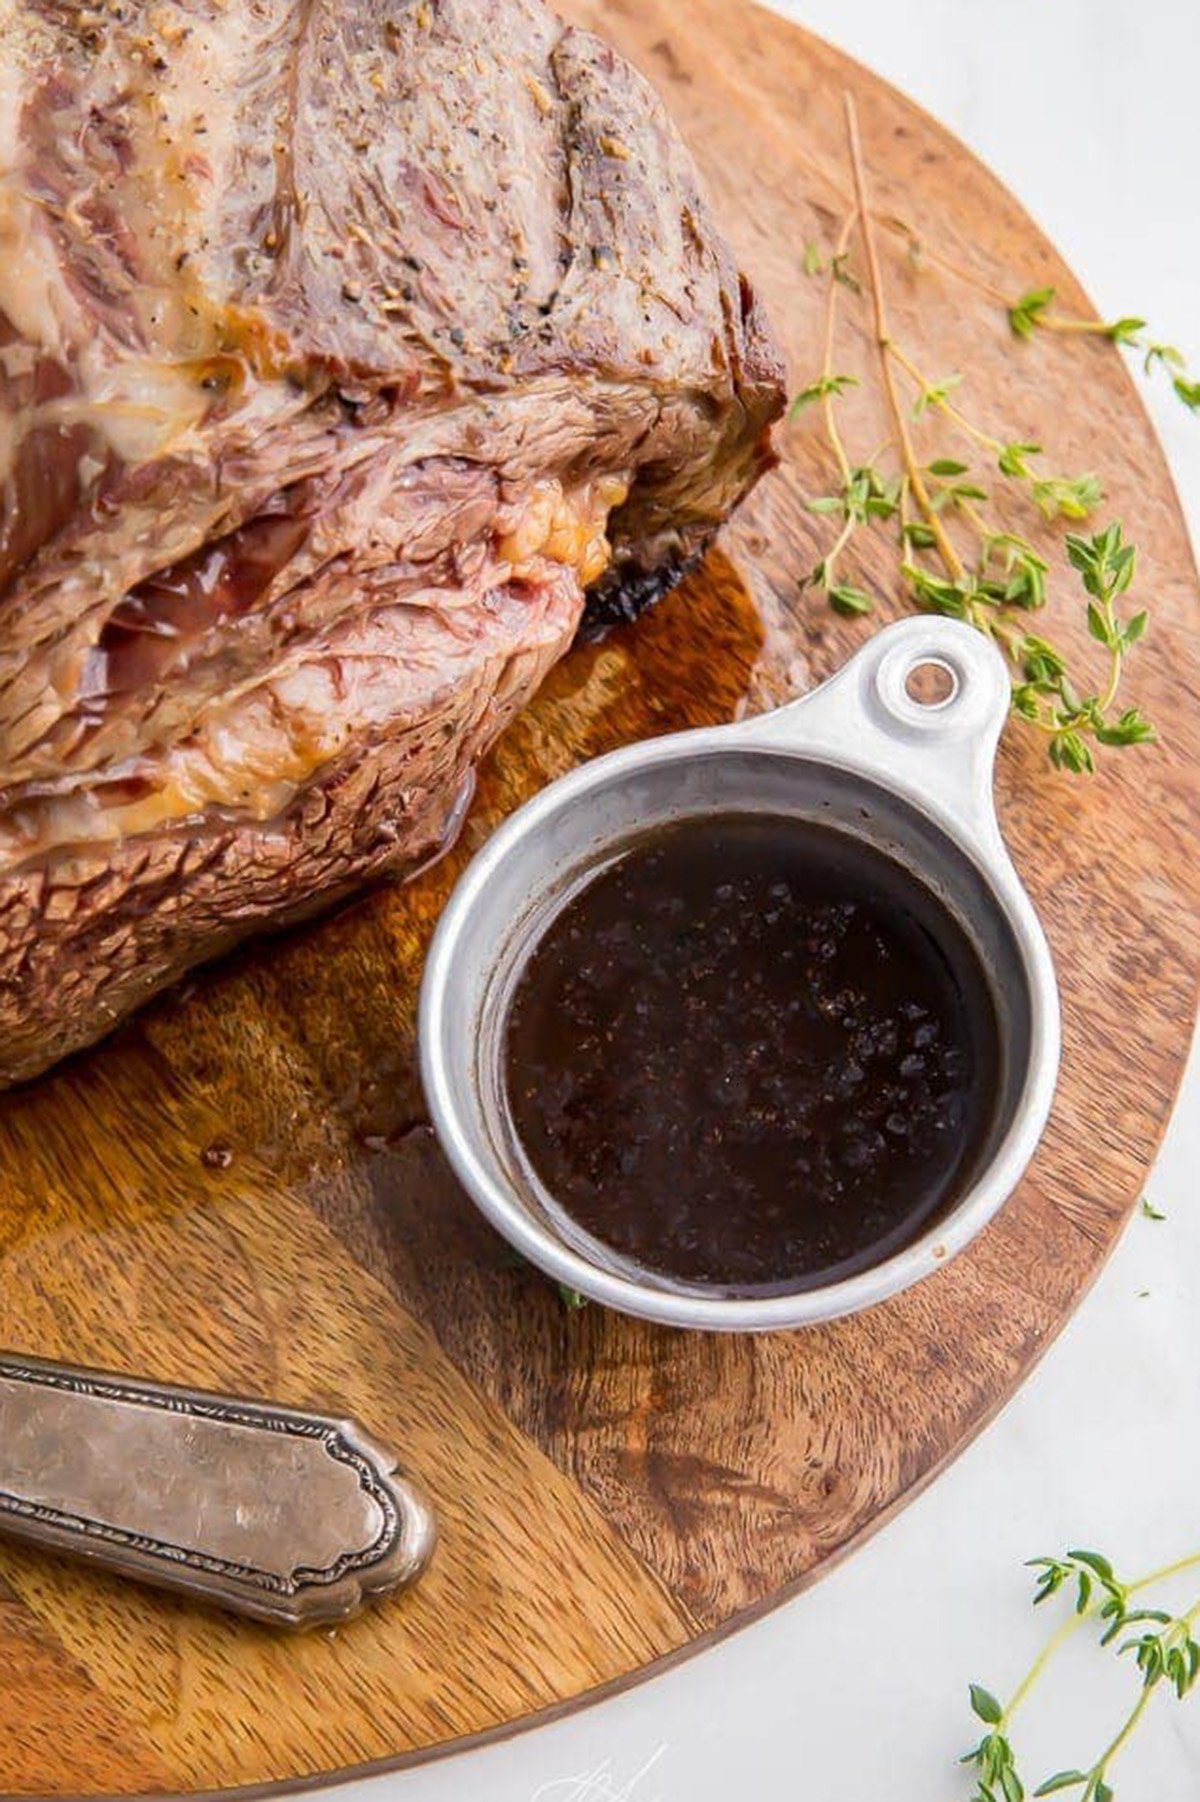 Overhead view of a small silver ramekin holding deep, rich au jus next to a holiday prime rib.